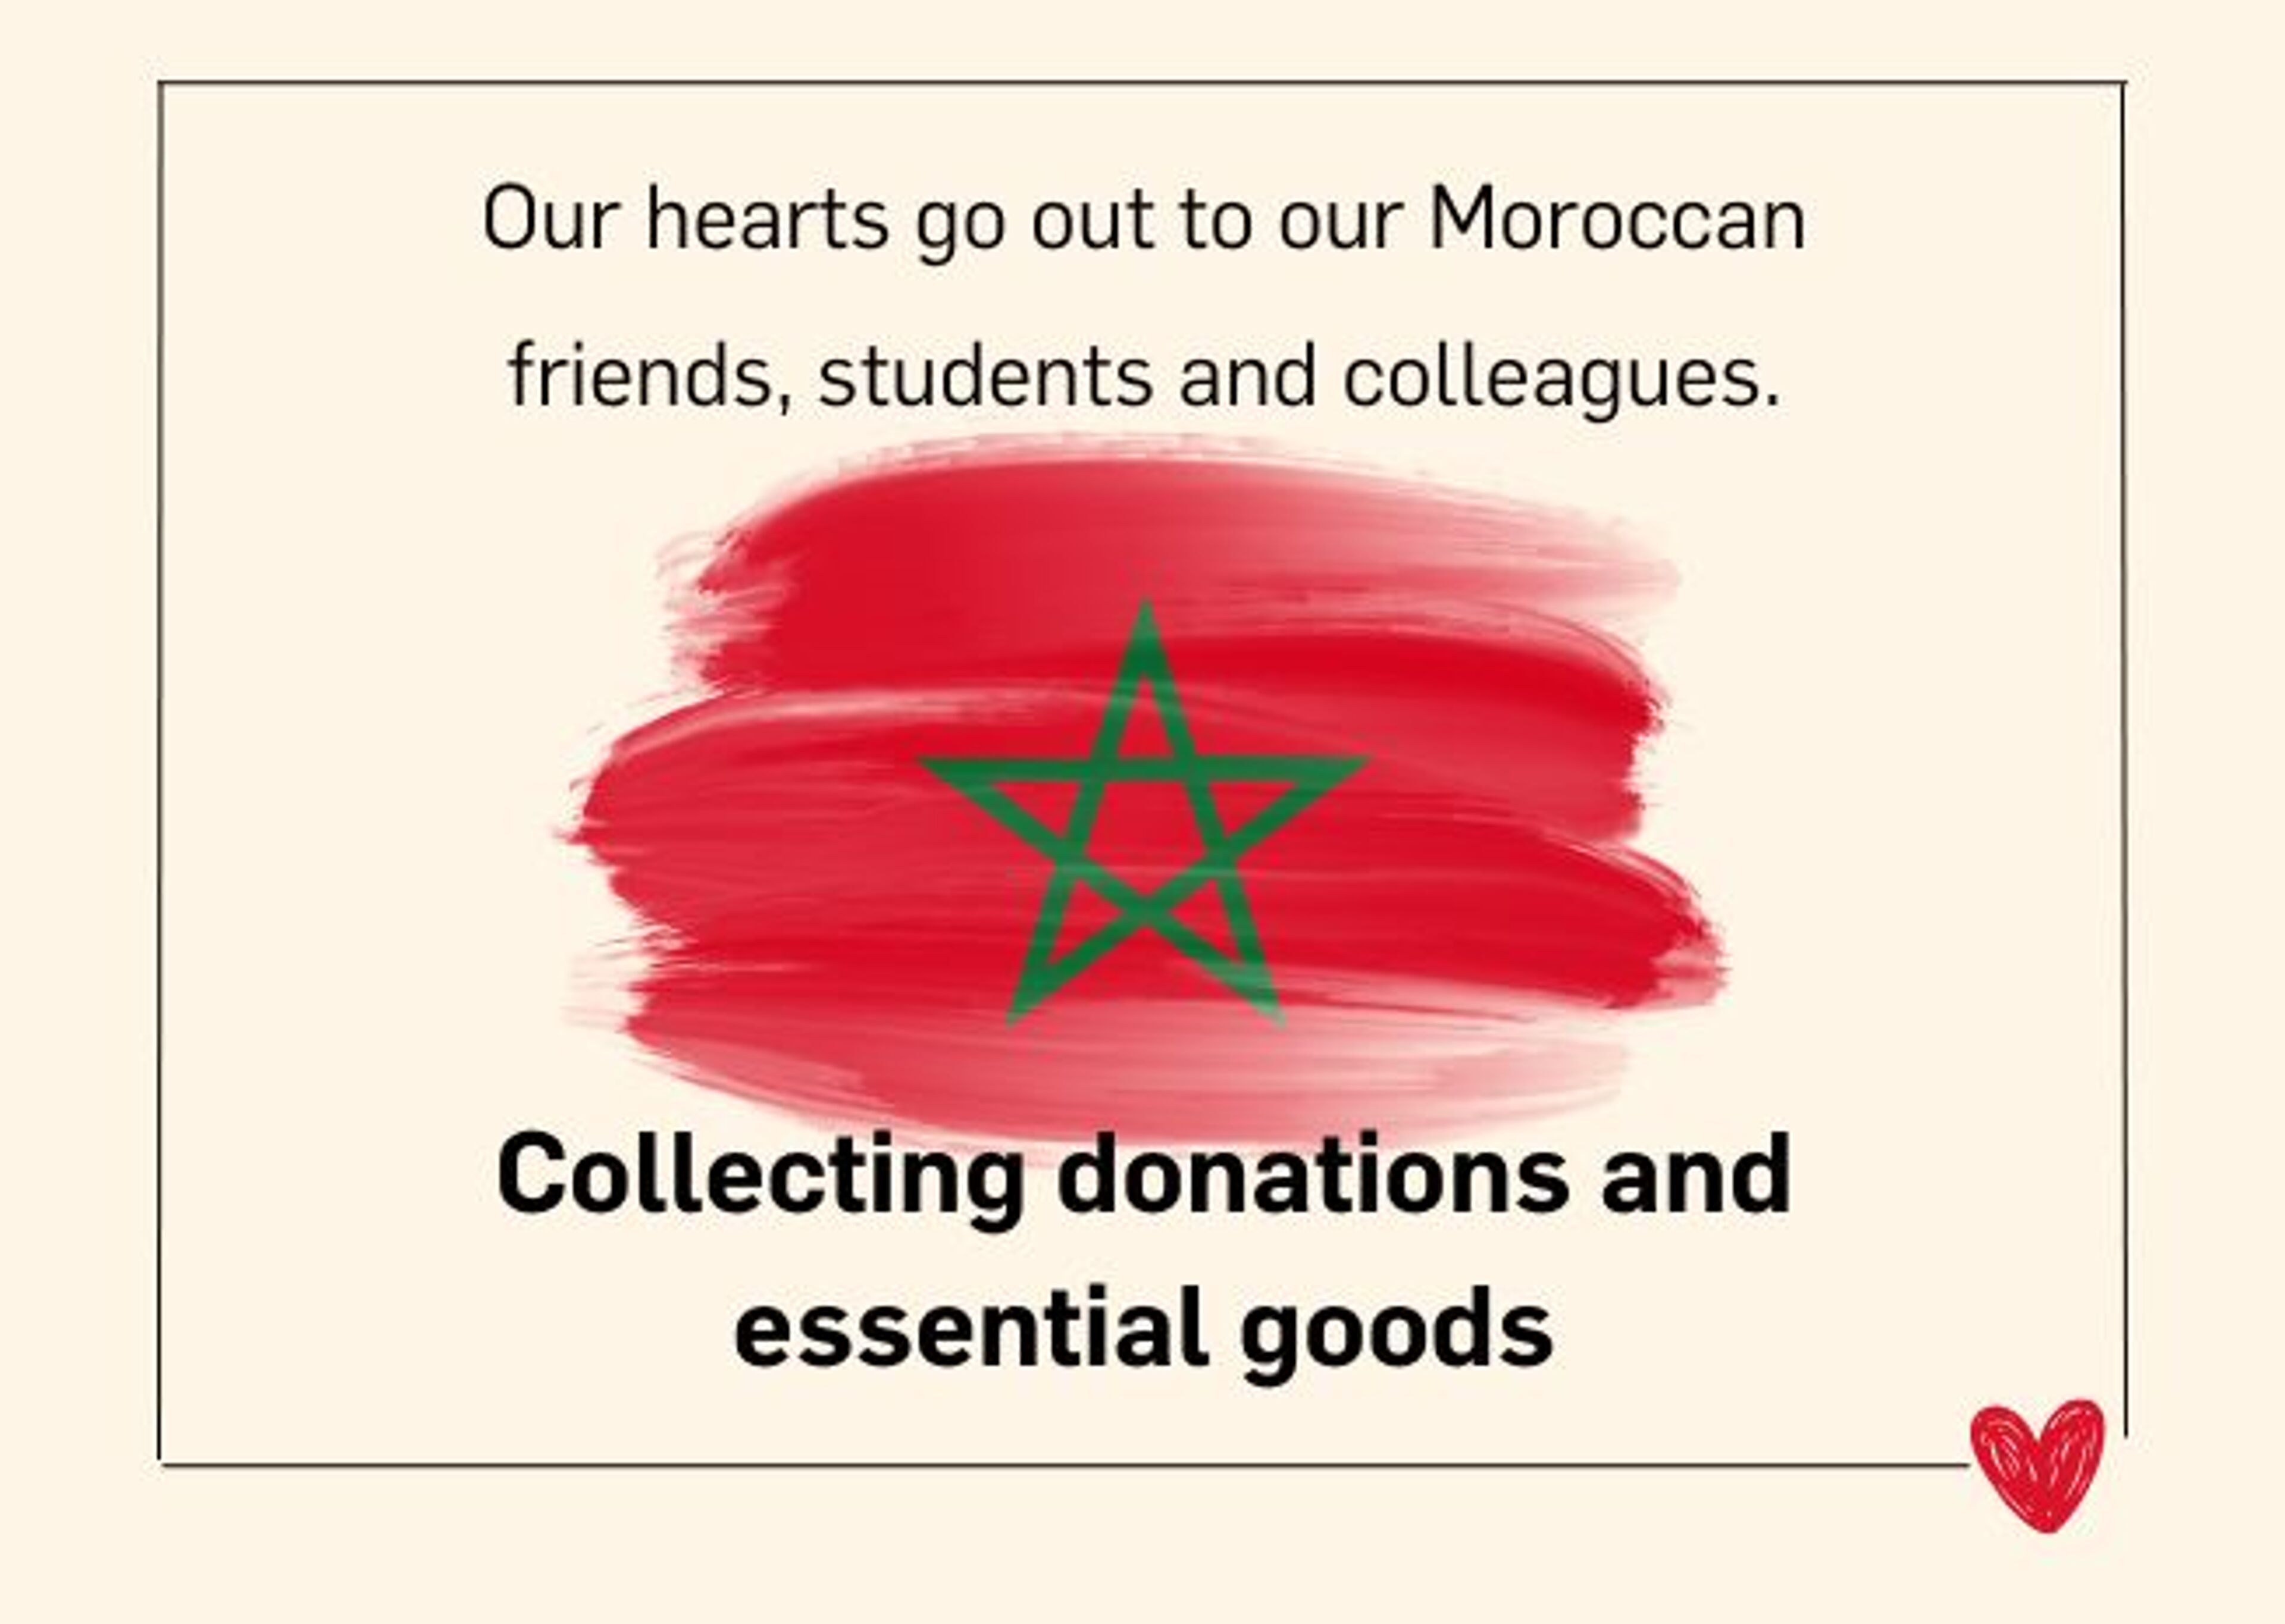 An image featuring a message of support for Moroccan individuals, with a call for donations and essential goods, superimposed on the Moroccan flag.